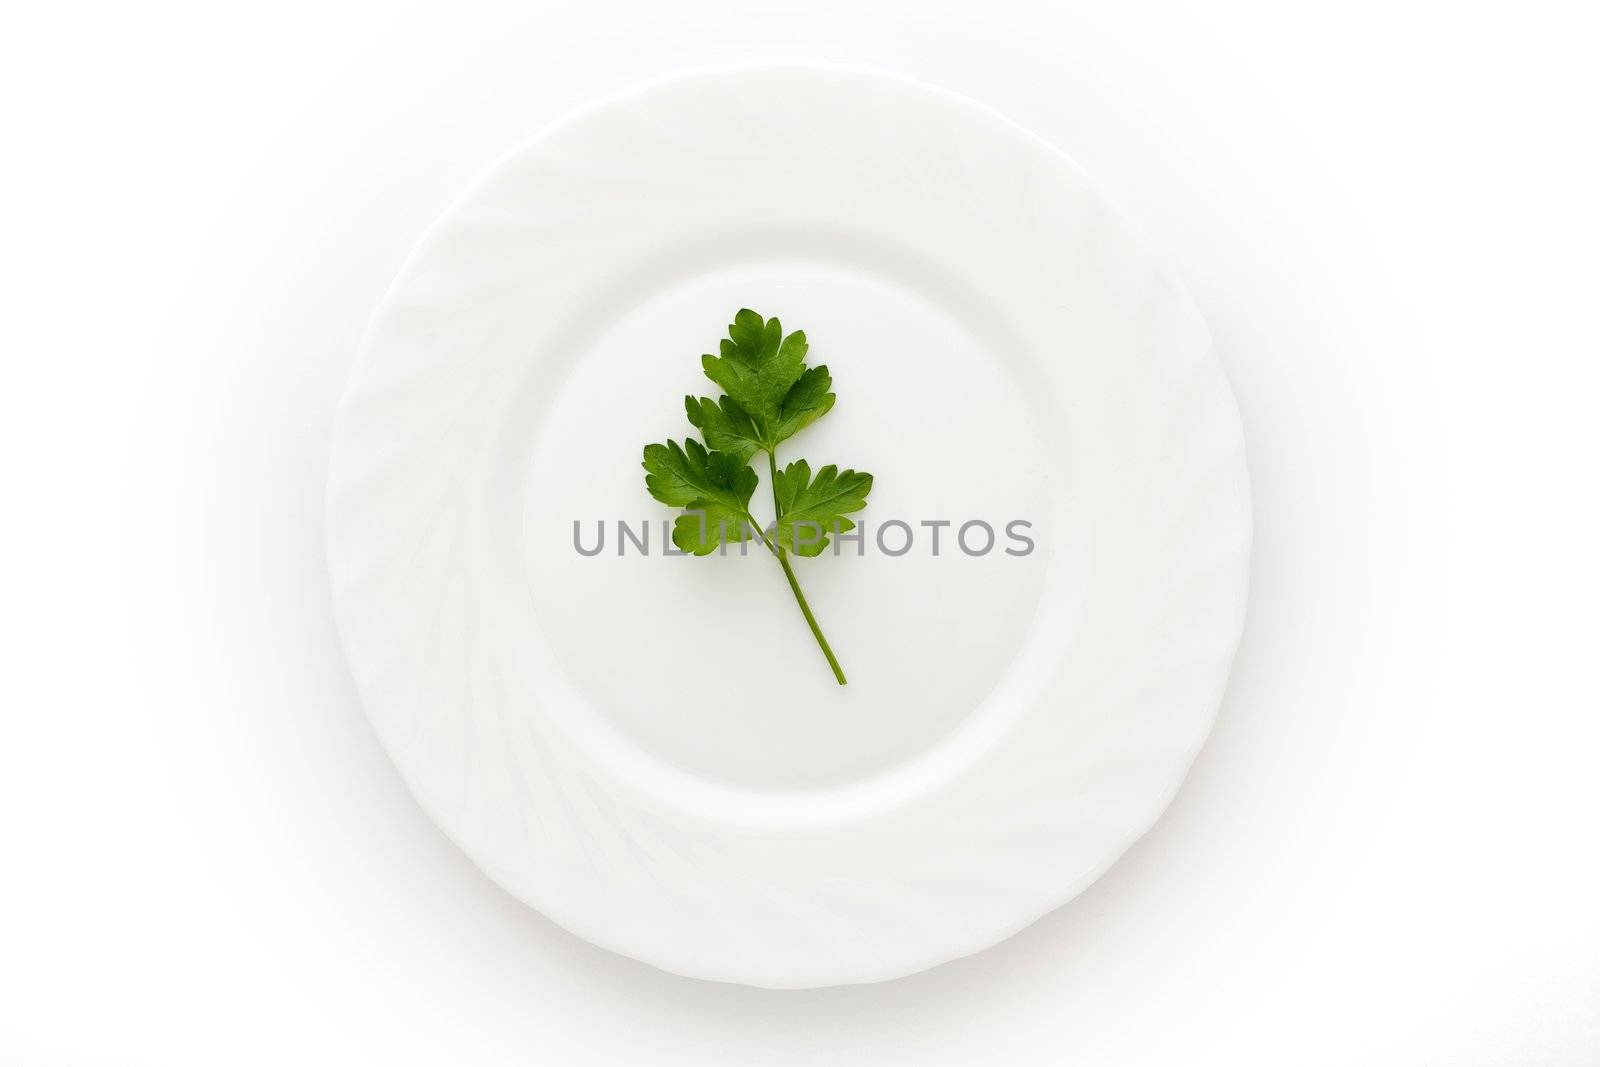 An image of a plate with leaf of parsley on it